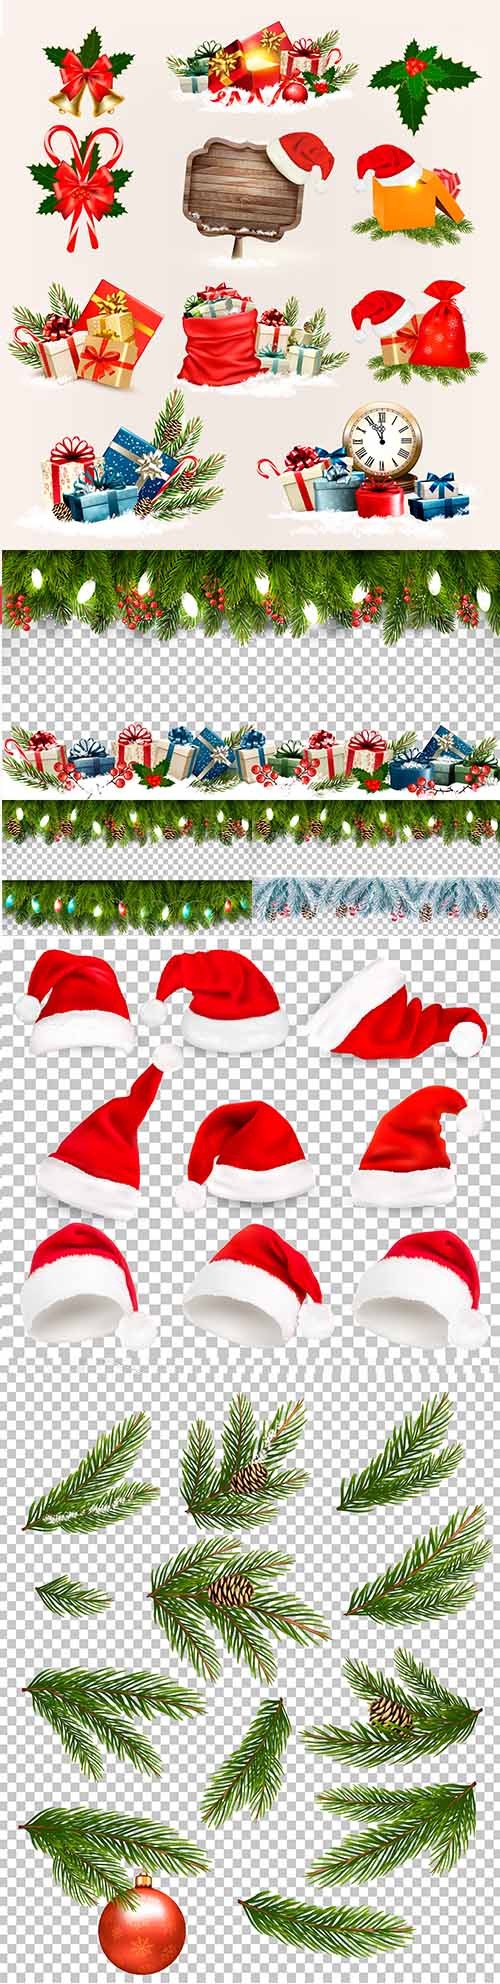 Vector set of Christmas icons and objects, boards with branches of tree